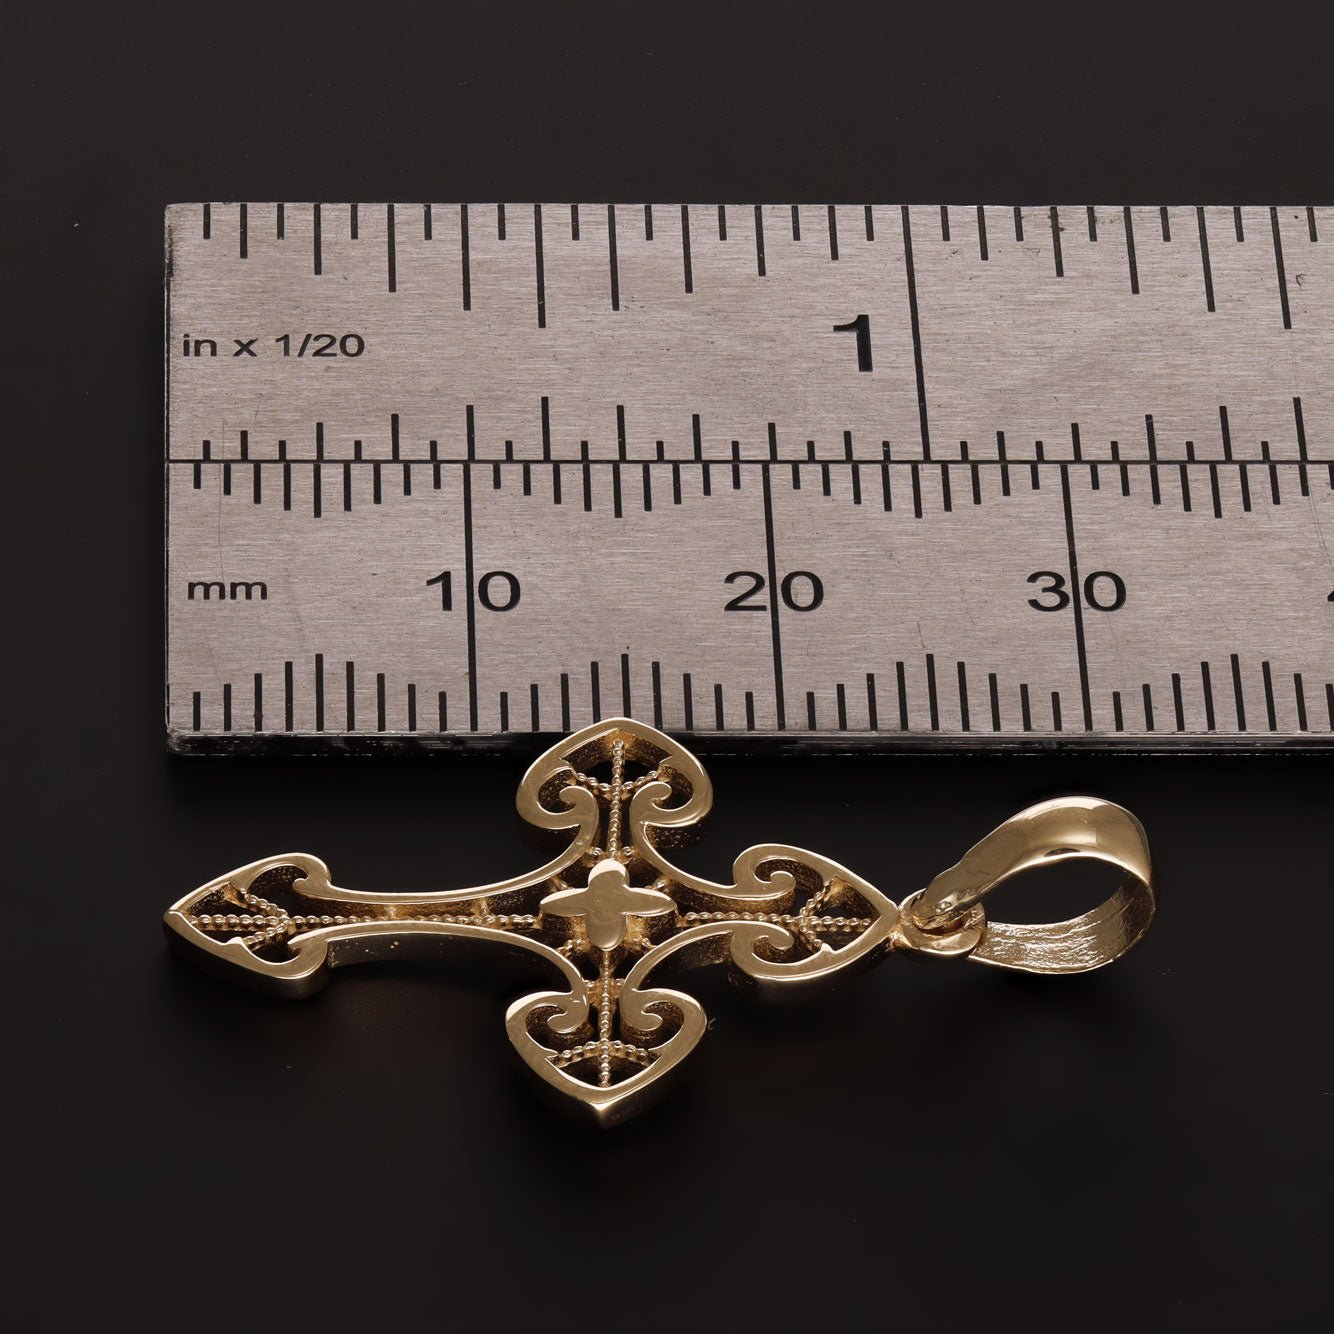 9ct Gold Unique Patterned Cross Pendant - 32mm - FJewellery